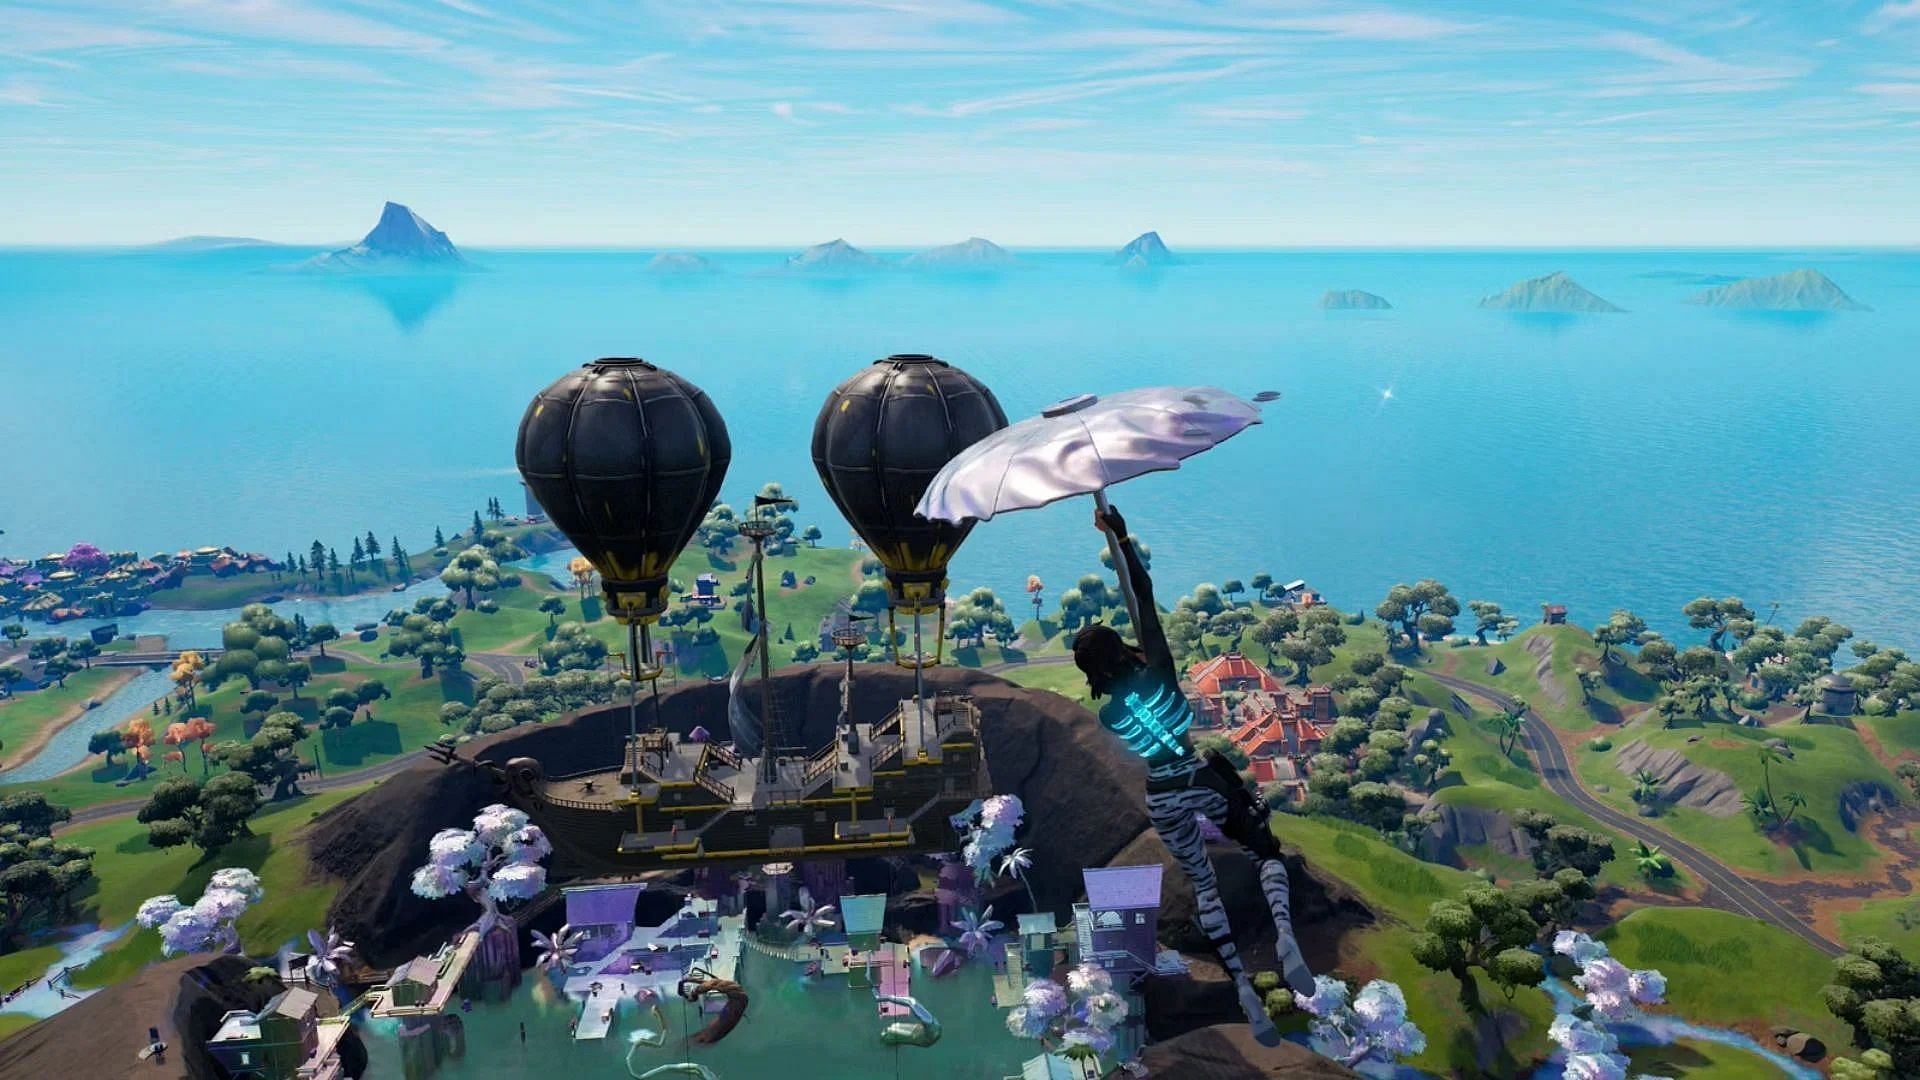 Lustrous Lagoon is one of the most popular places in Fortnite (Image via Epic Games)